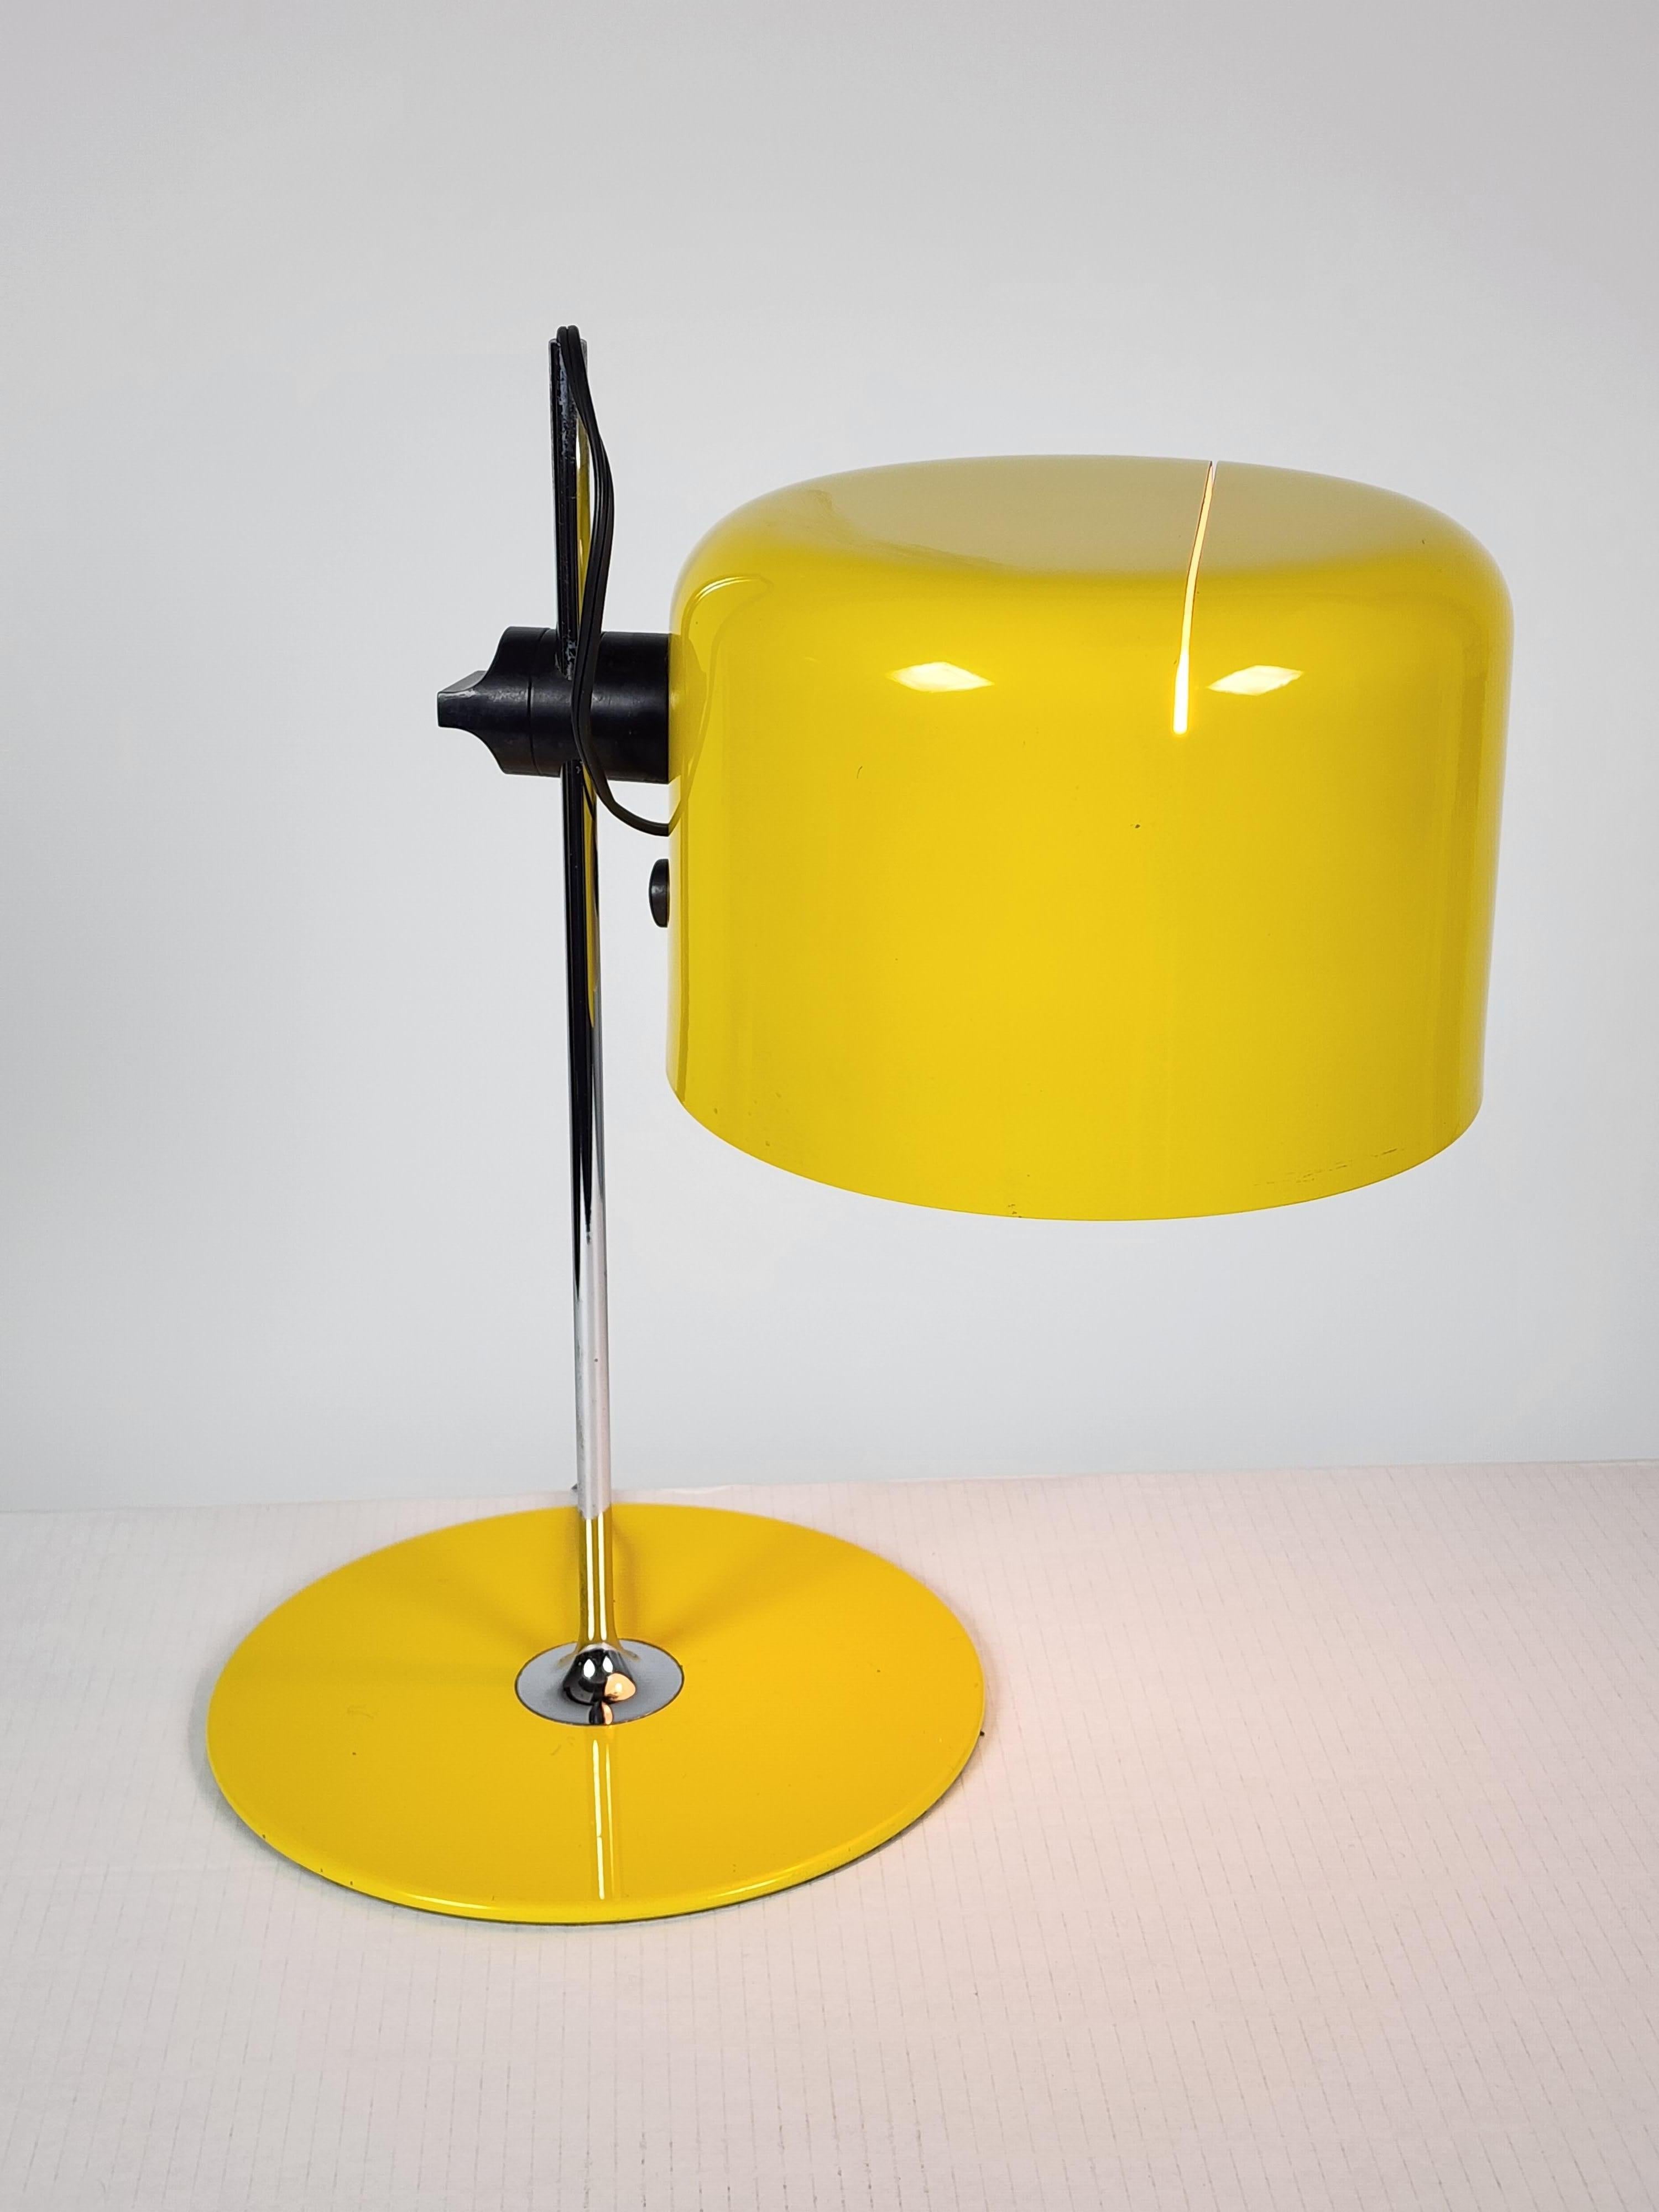 1967  Early 2202 model  ''Coupe''  table lamp by Joe Colombo  for Guiseppe Ostuni owner of  Oluce .

Classsic slitted shade in an flamboyant yellow  glossy finish  . 

Well made with  solid  structure and hardware . 

E26 ceramic socket rated at 60